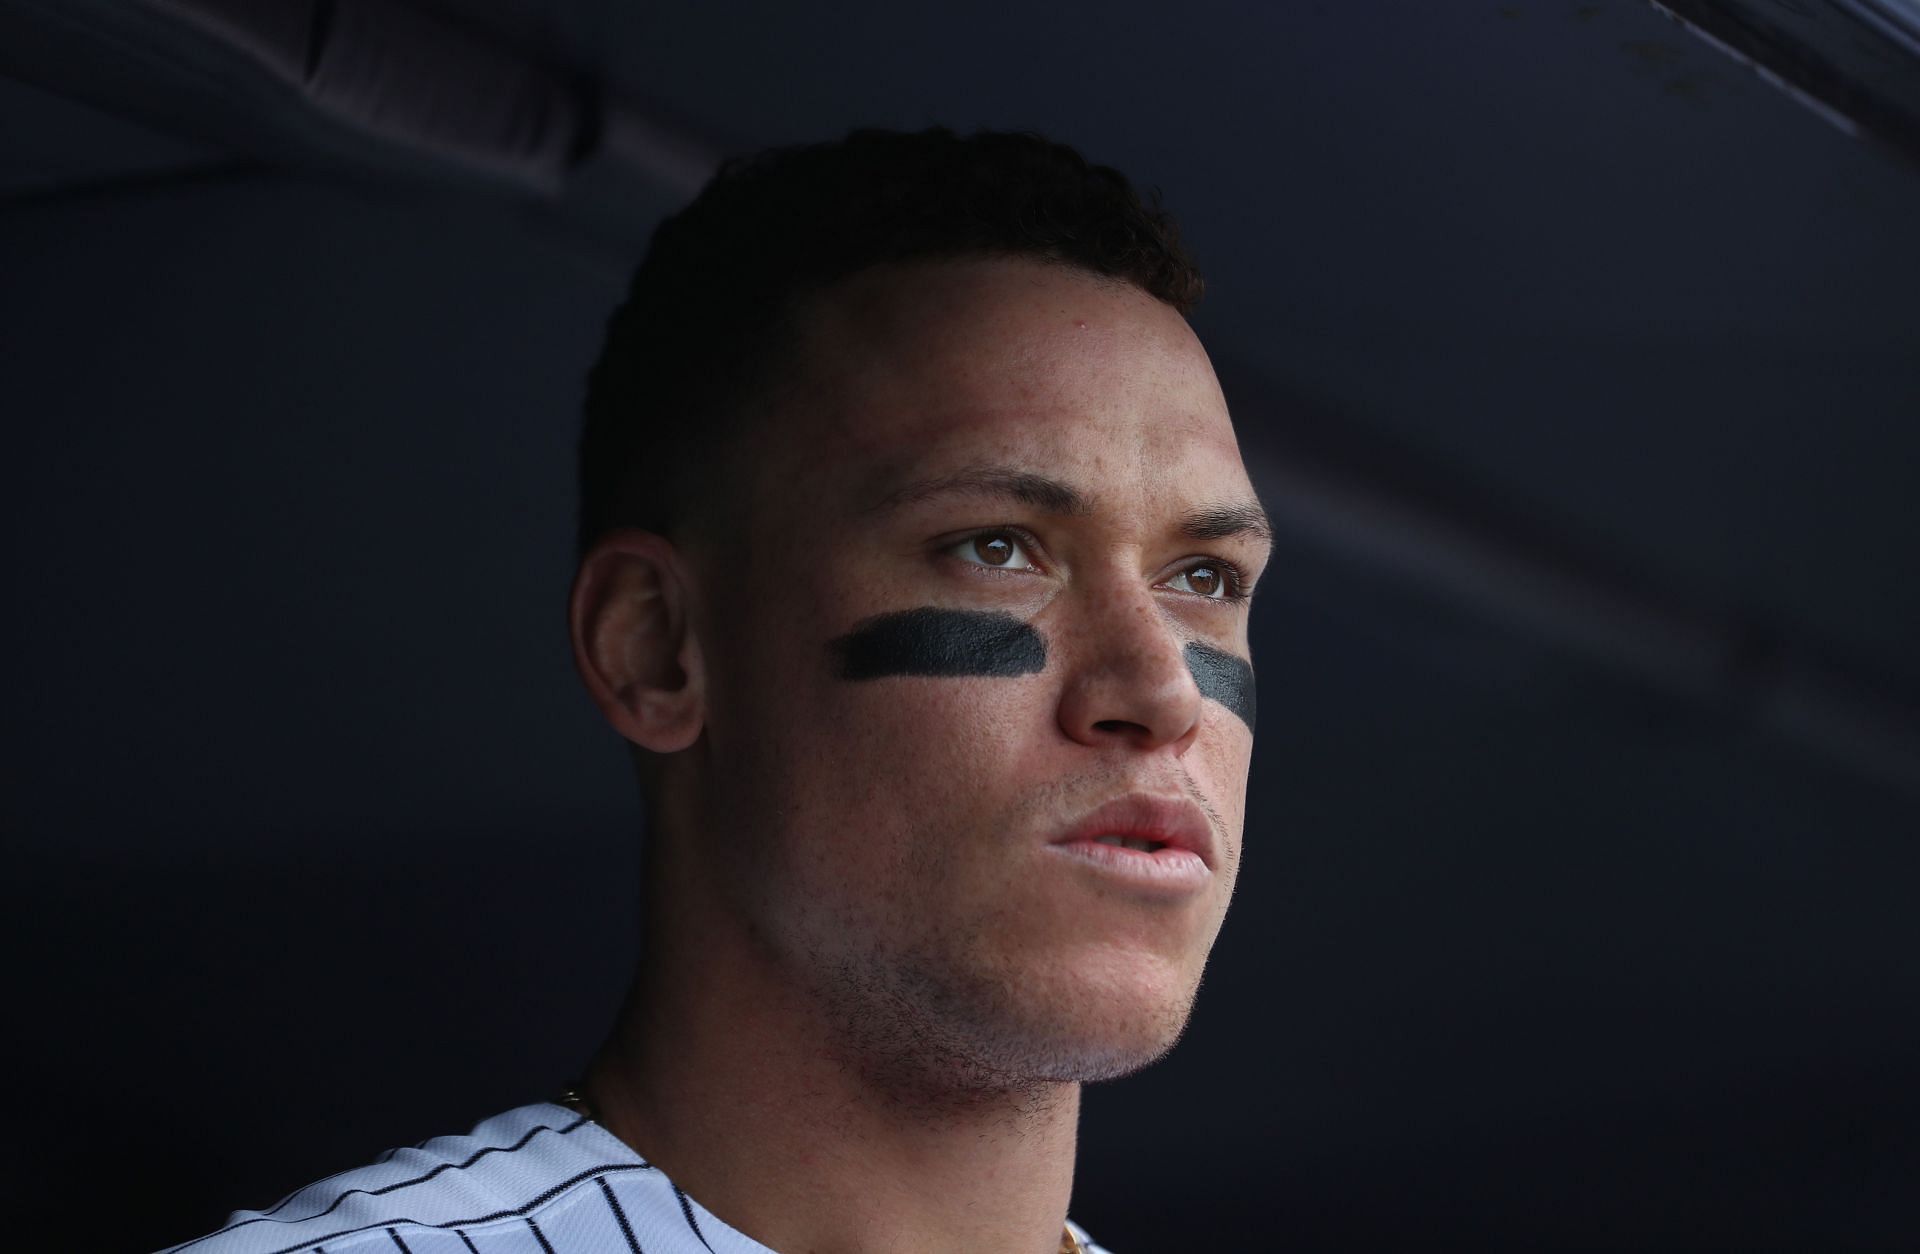 Aaron Judge looks on against the New York Mets during their game at Yankee Stadium